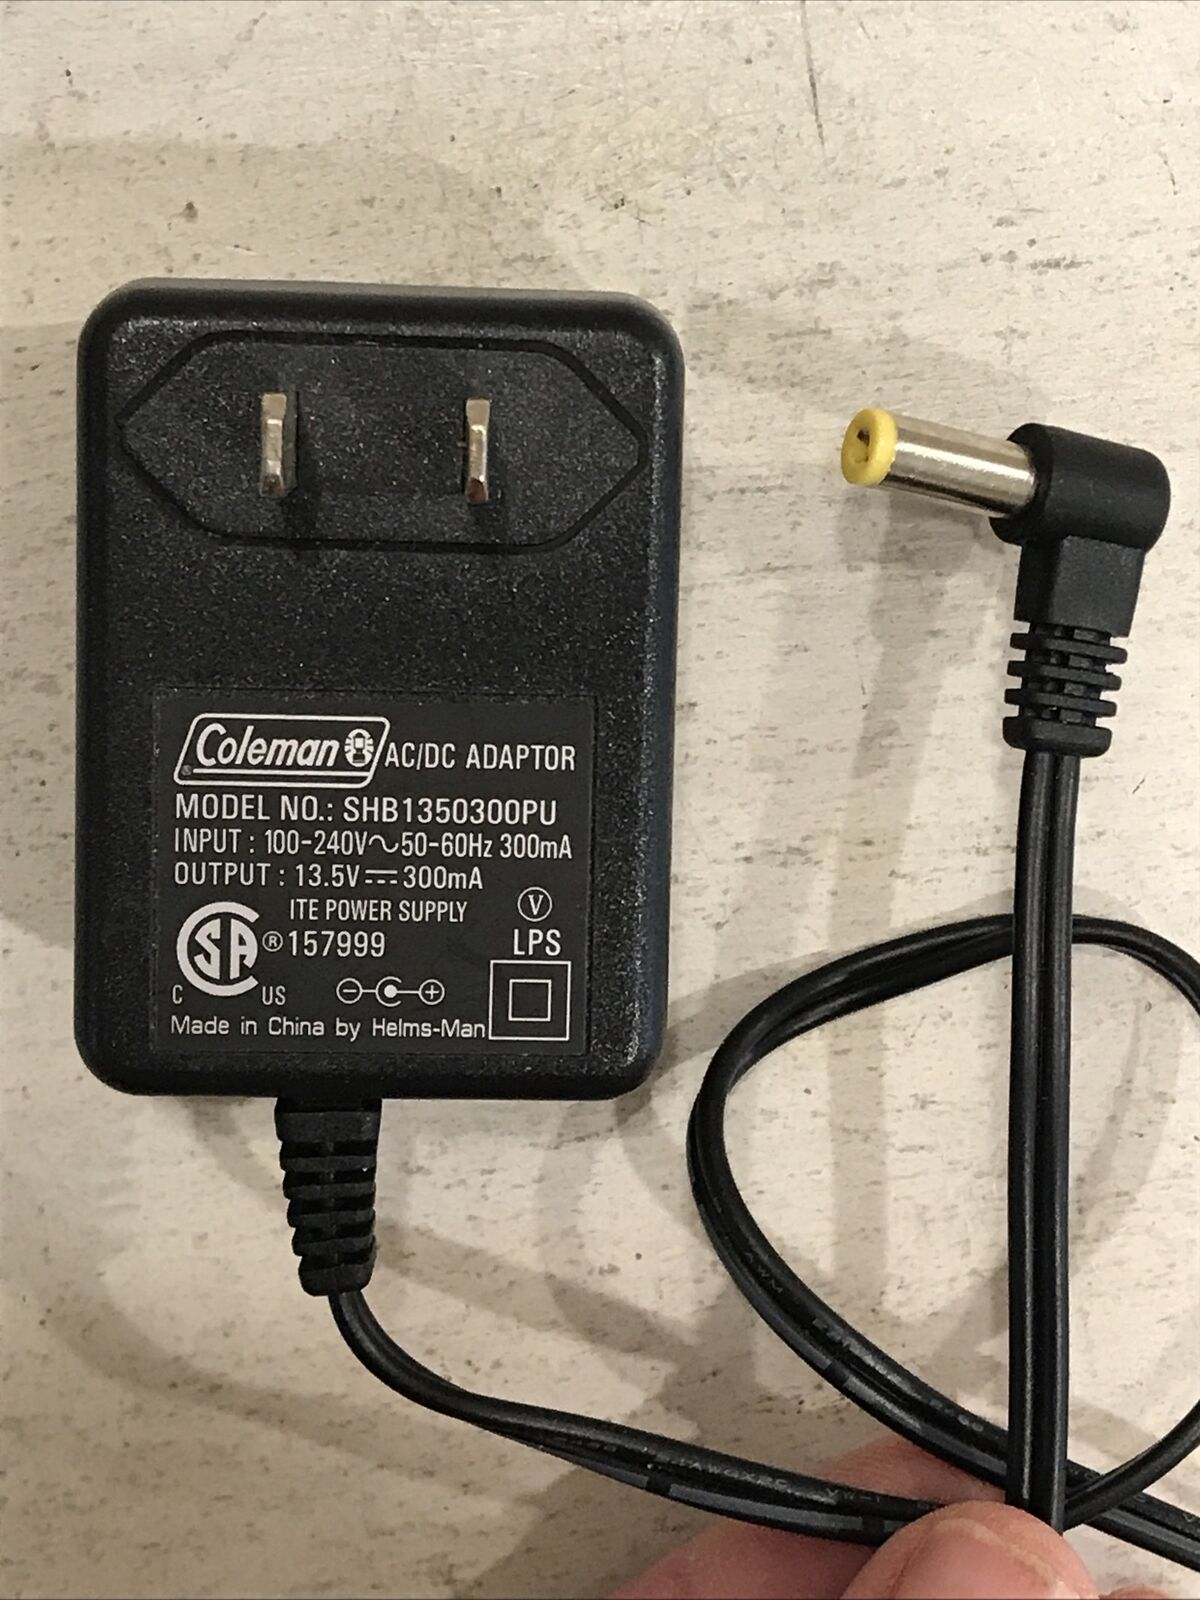 Coleman AC/DC Adapter Power Supply Model SHB1350300PU Output 13.5V Type: AC/DC Adapter Features: new Output Voltage: